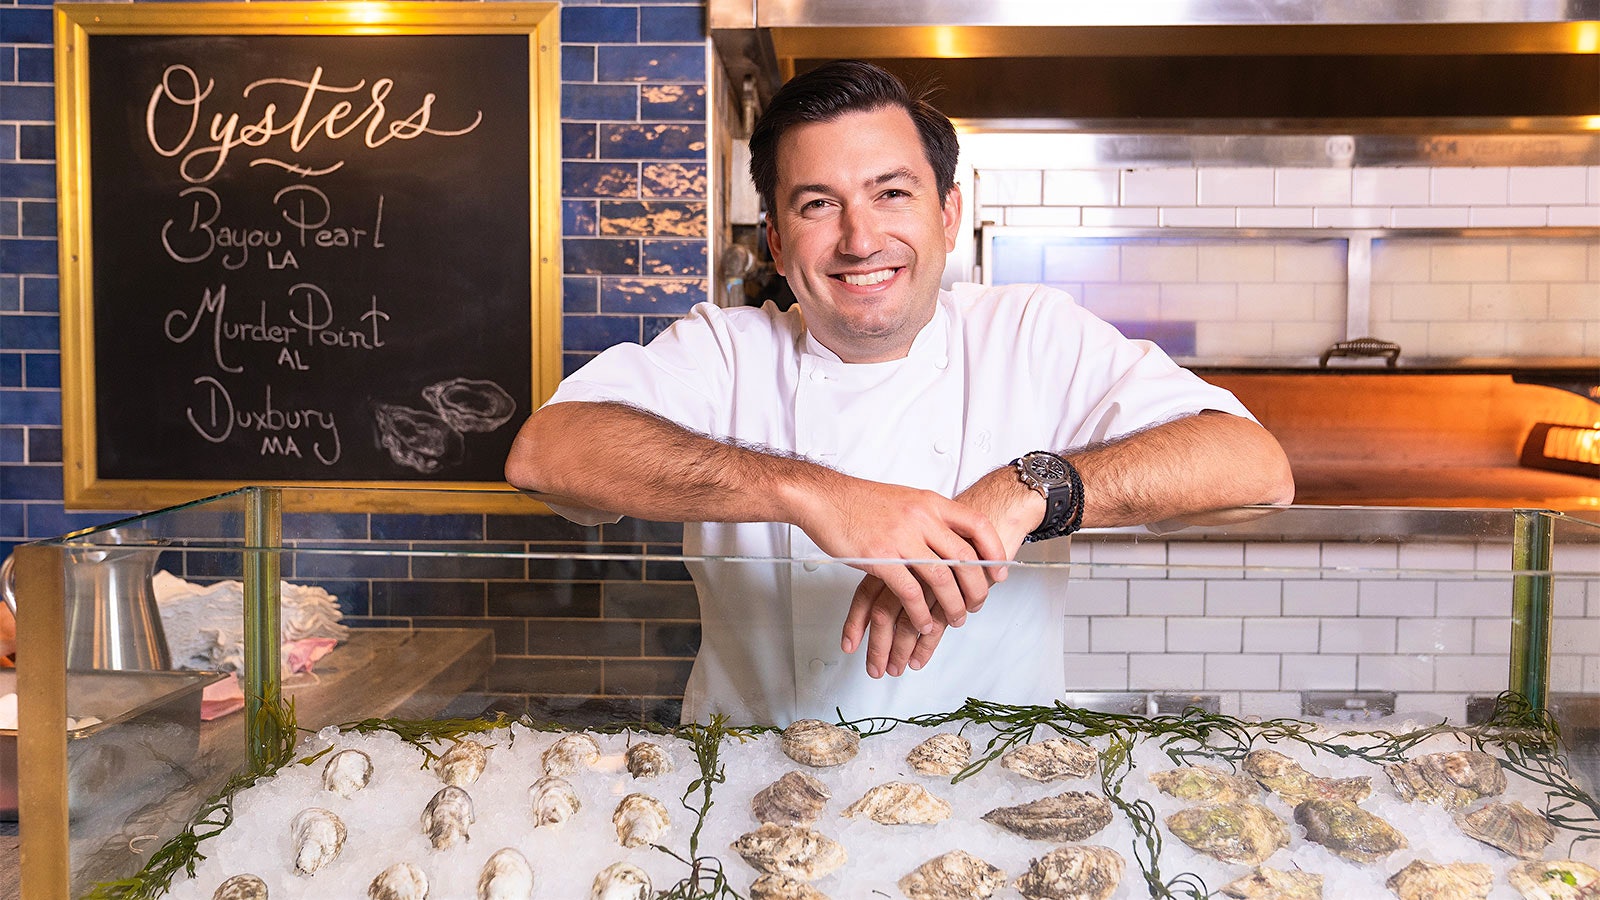  Portrait of chef Aaron Bludorn behind a display of oysters at one of his Houston restaurants